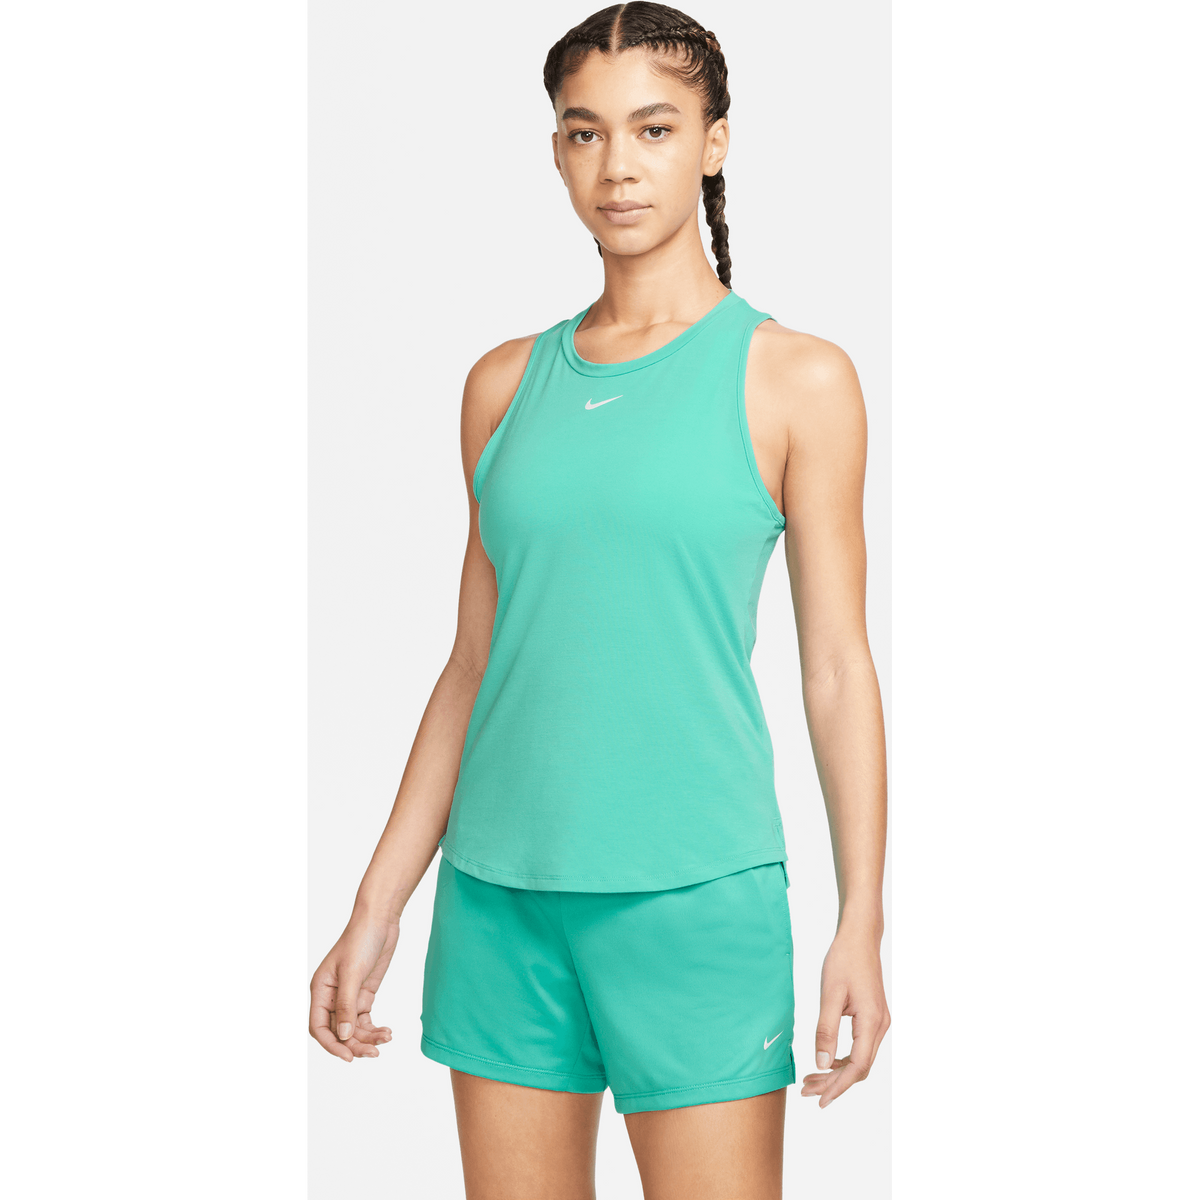 Nike-Women's Nike DRI-FIT One Luxe-Washed Teal-Pacers Running